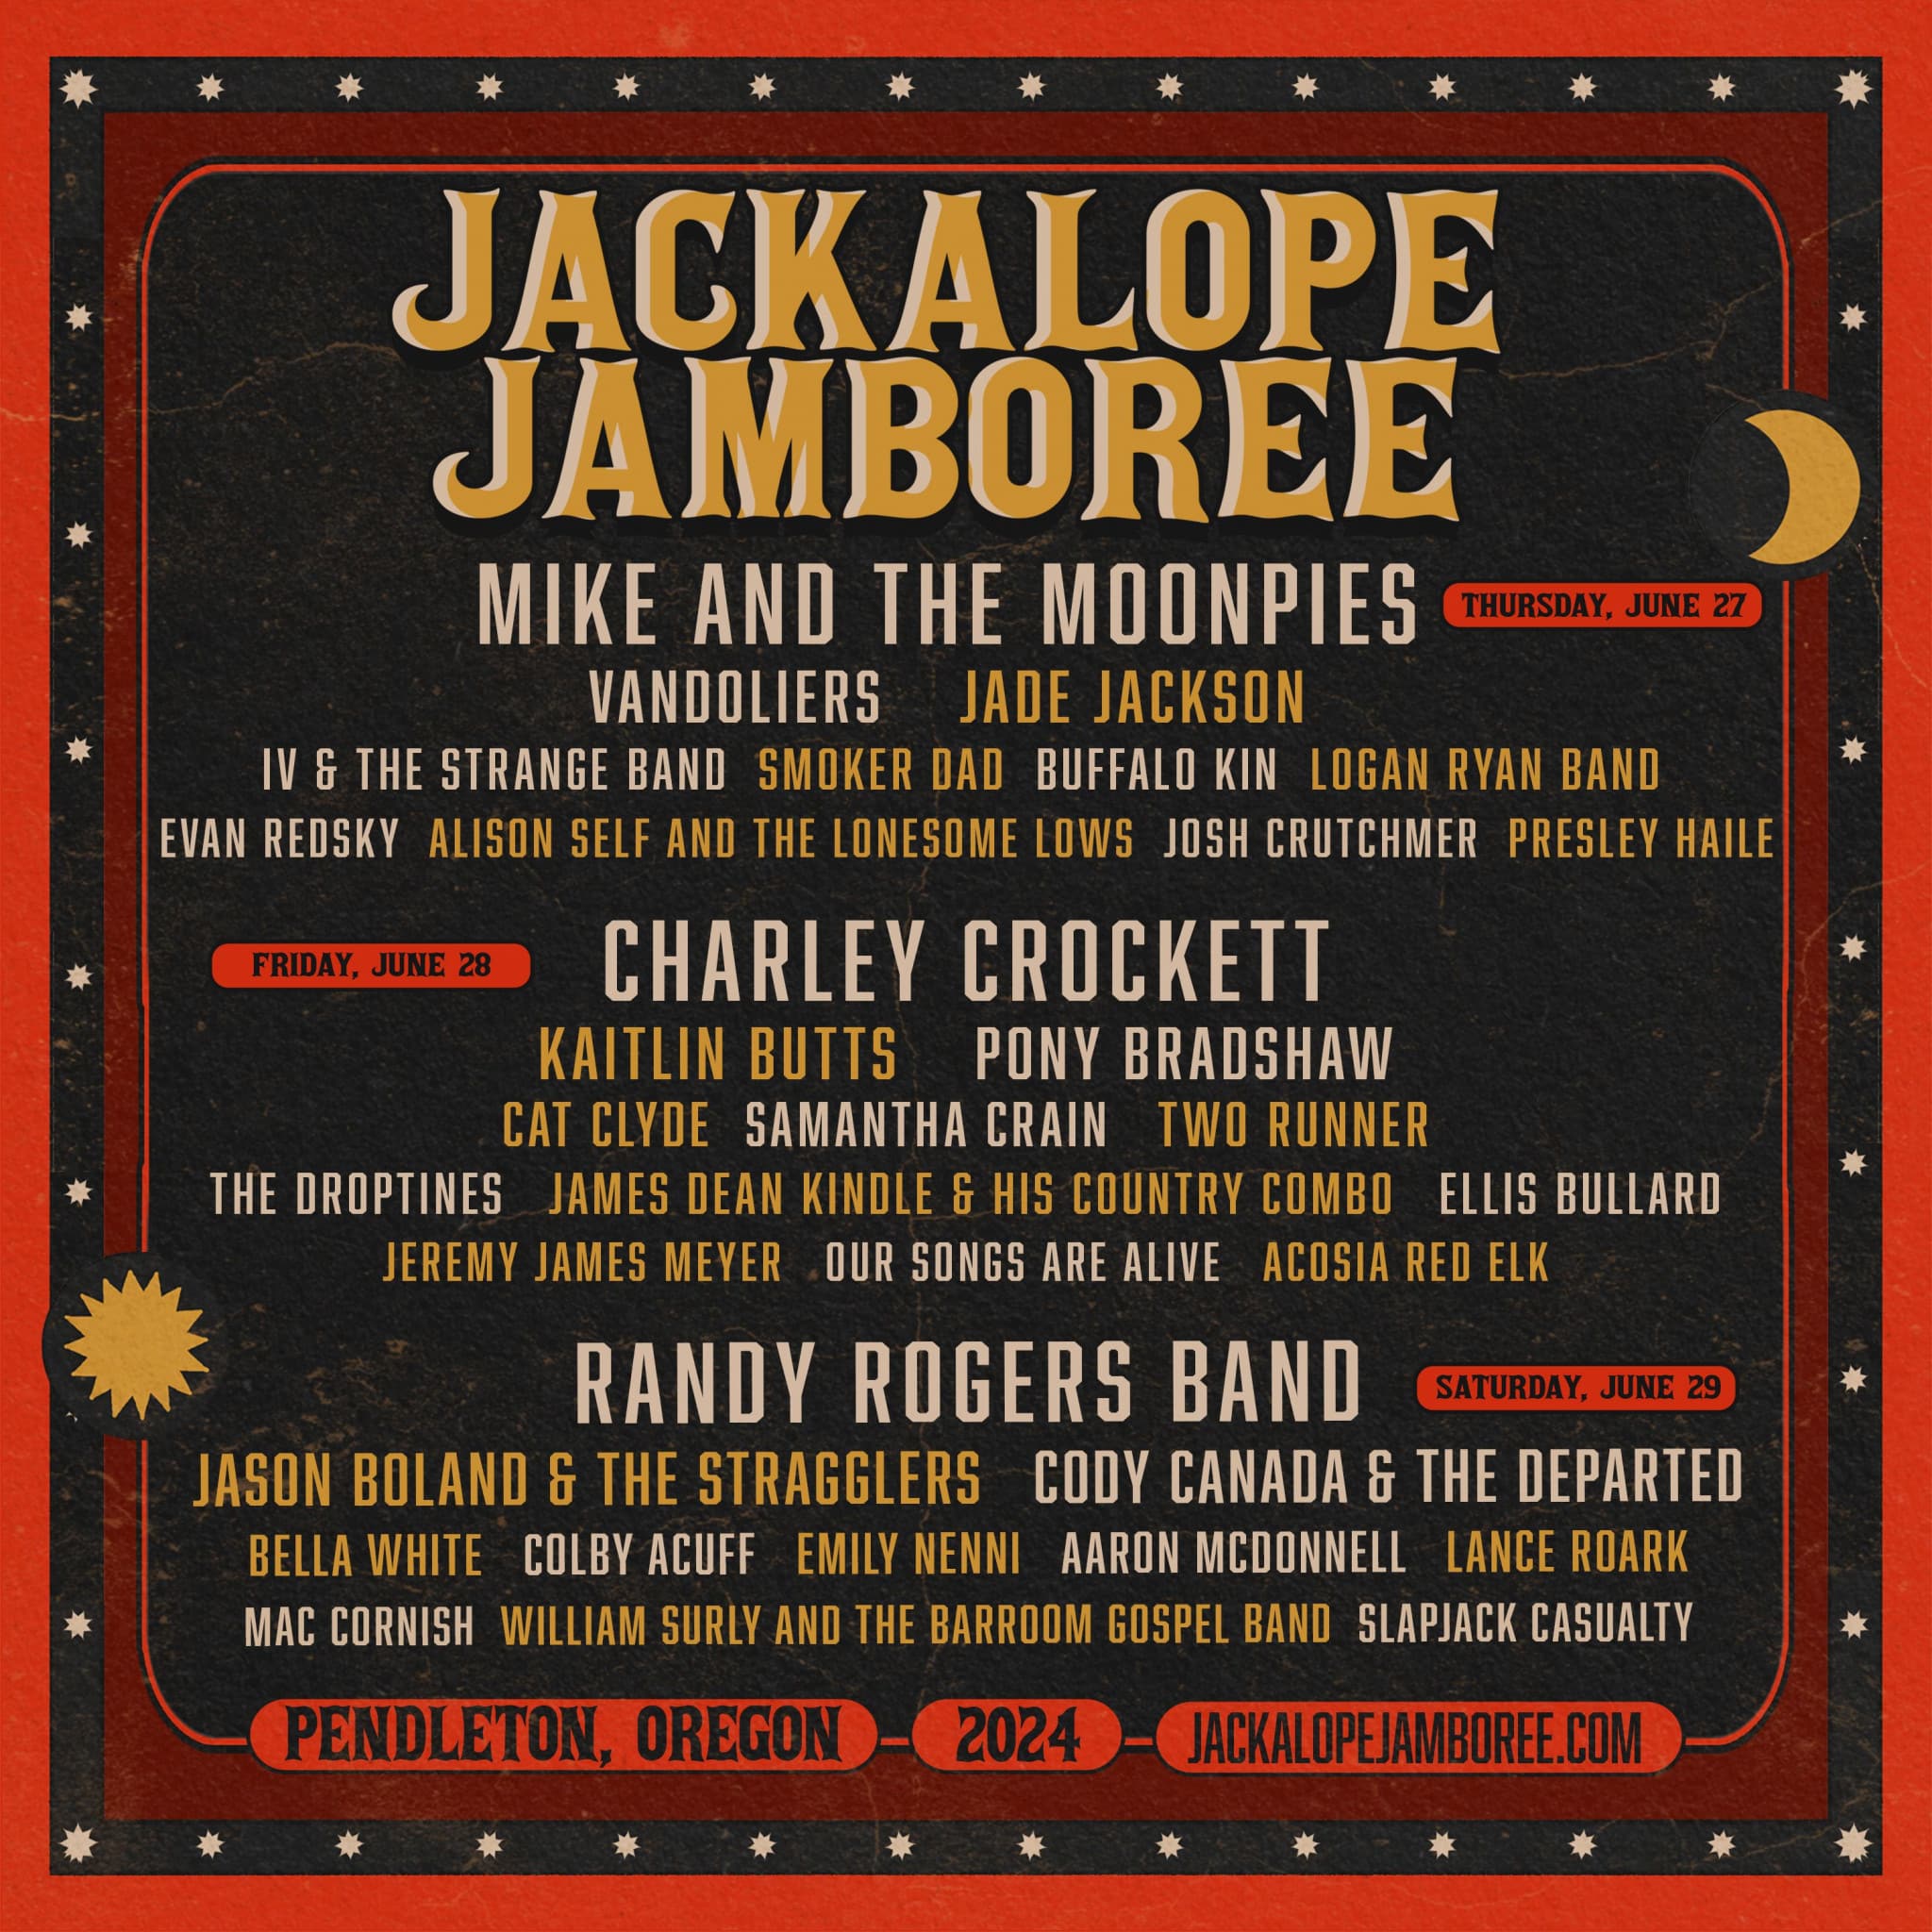 The lineup poster for the 2024 Jackalope Jamboree in Oregon